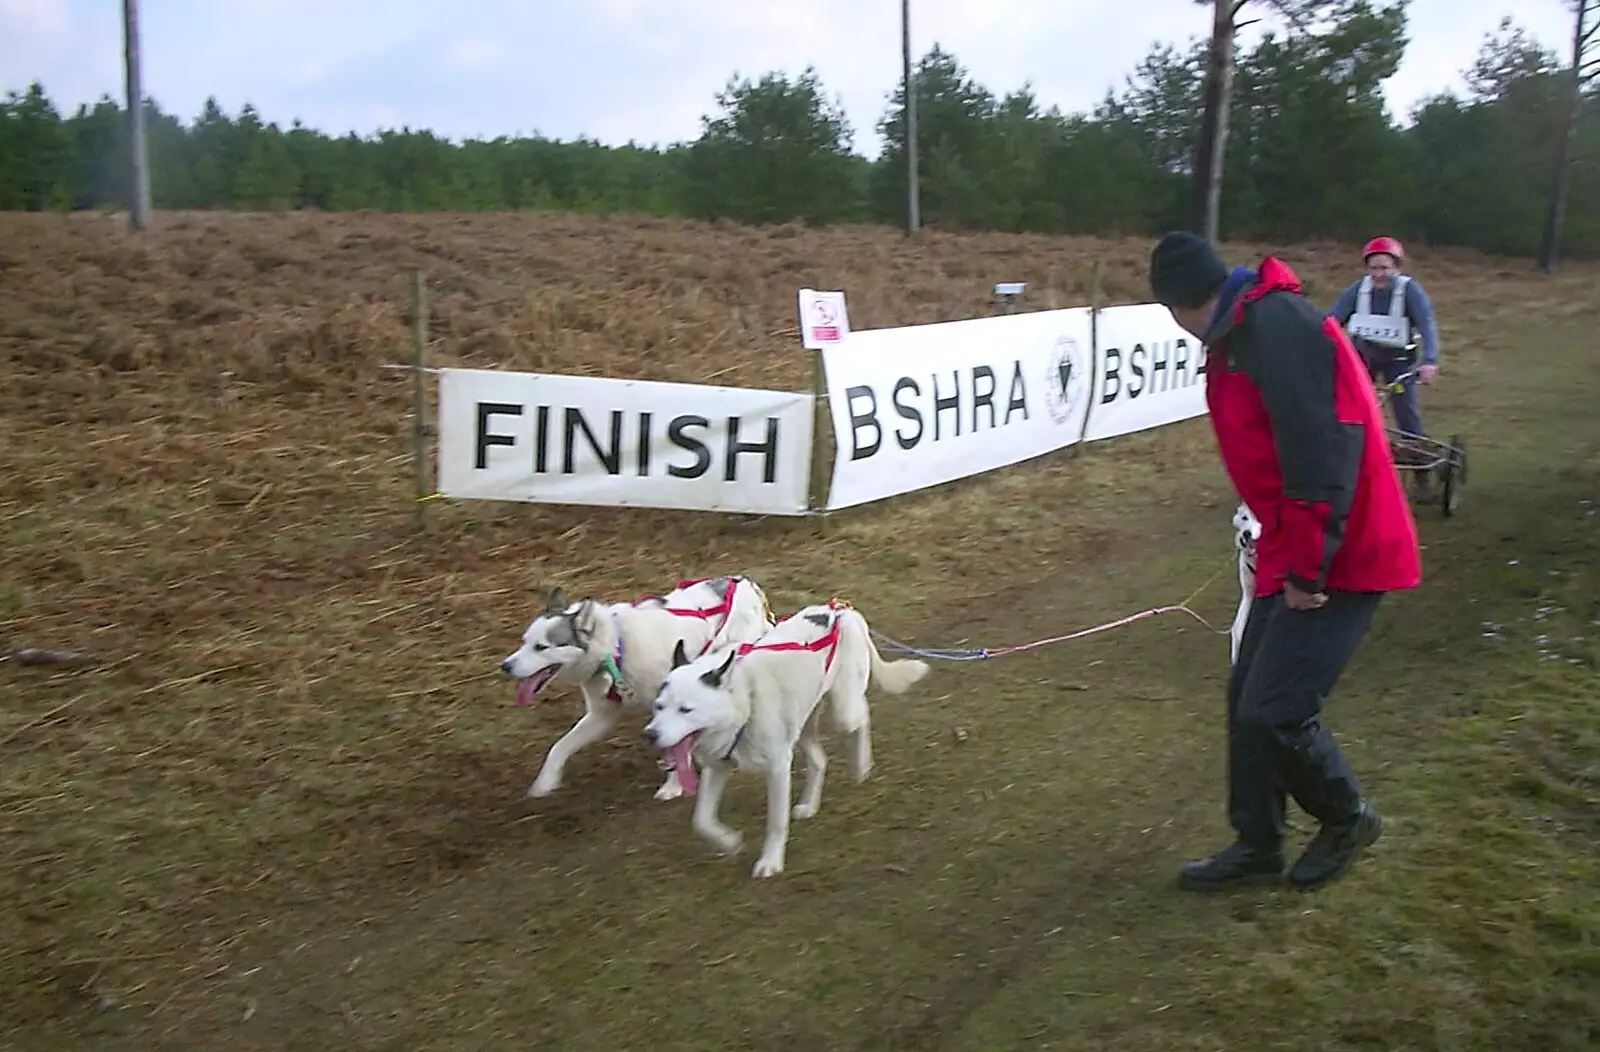 Some huskies cross the finishing line, from A day at the Husky Races, Lakenheath, Suffolk - 29th February 2004